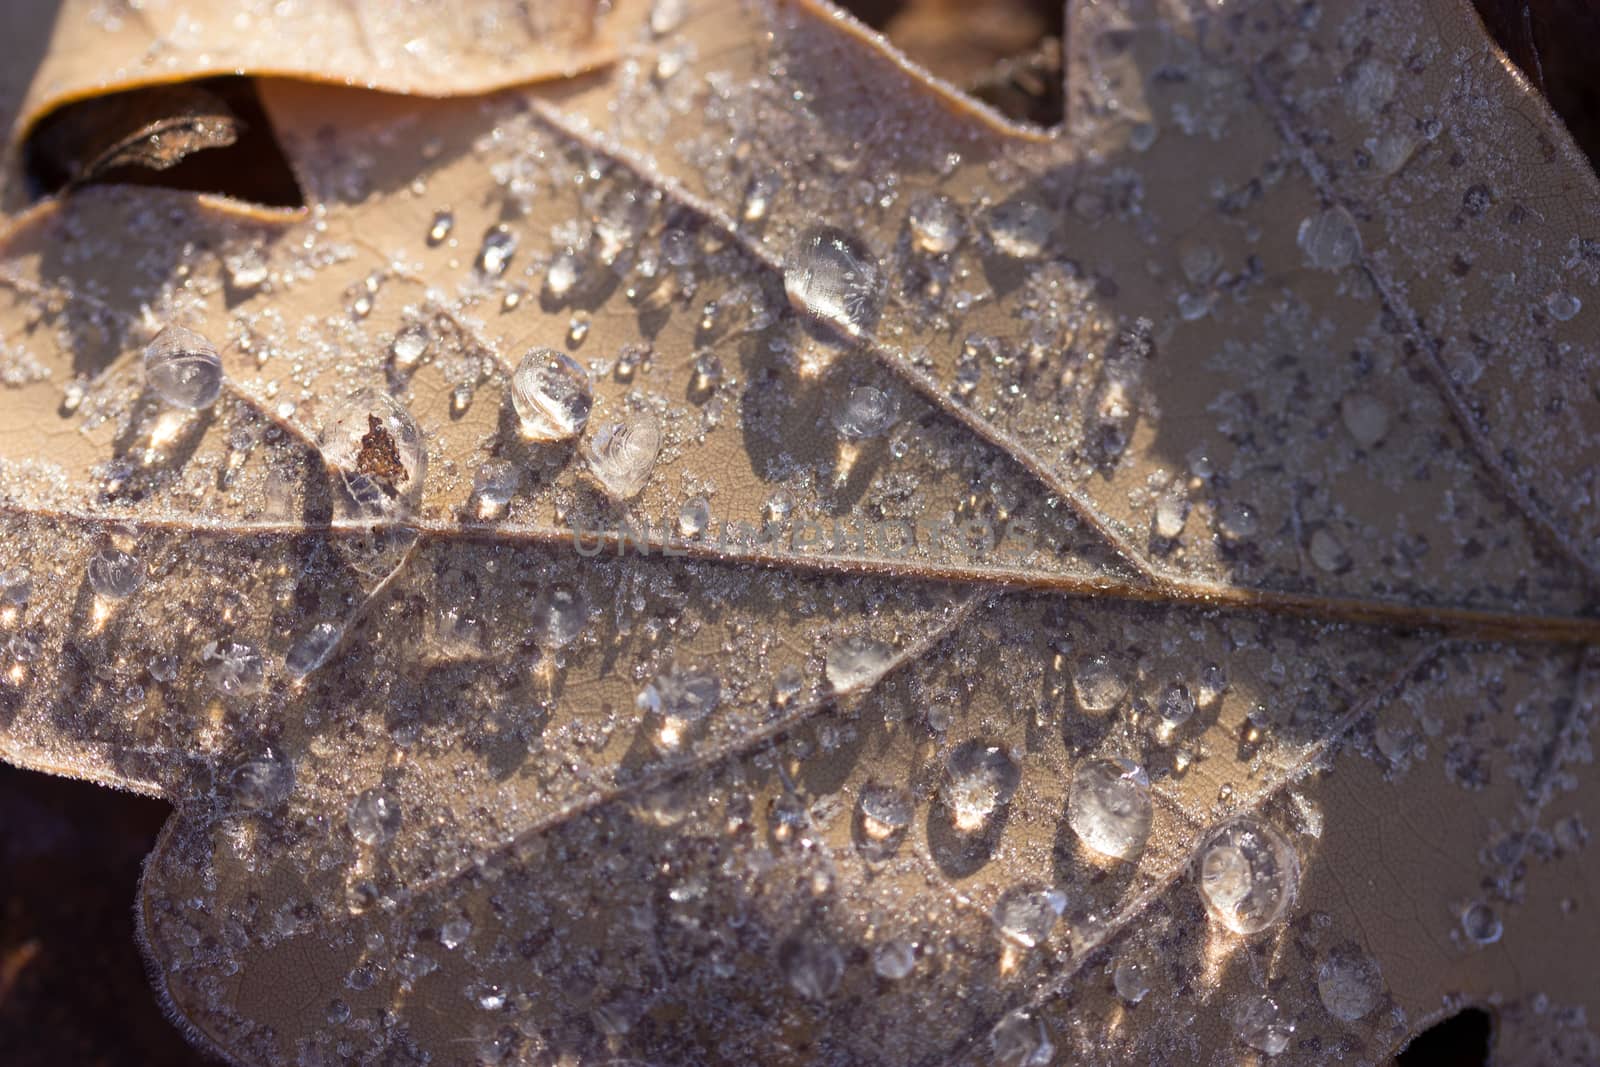 Dry autumn oak leaf with water drops after rain in the forest park